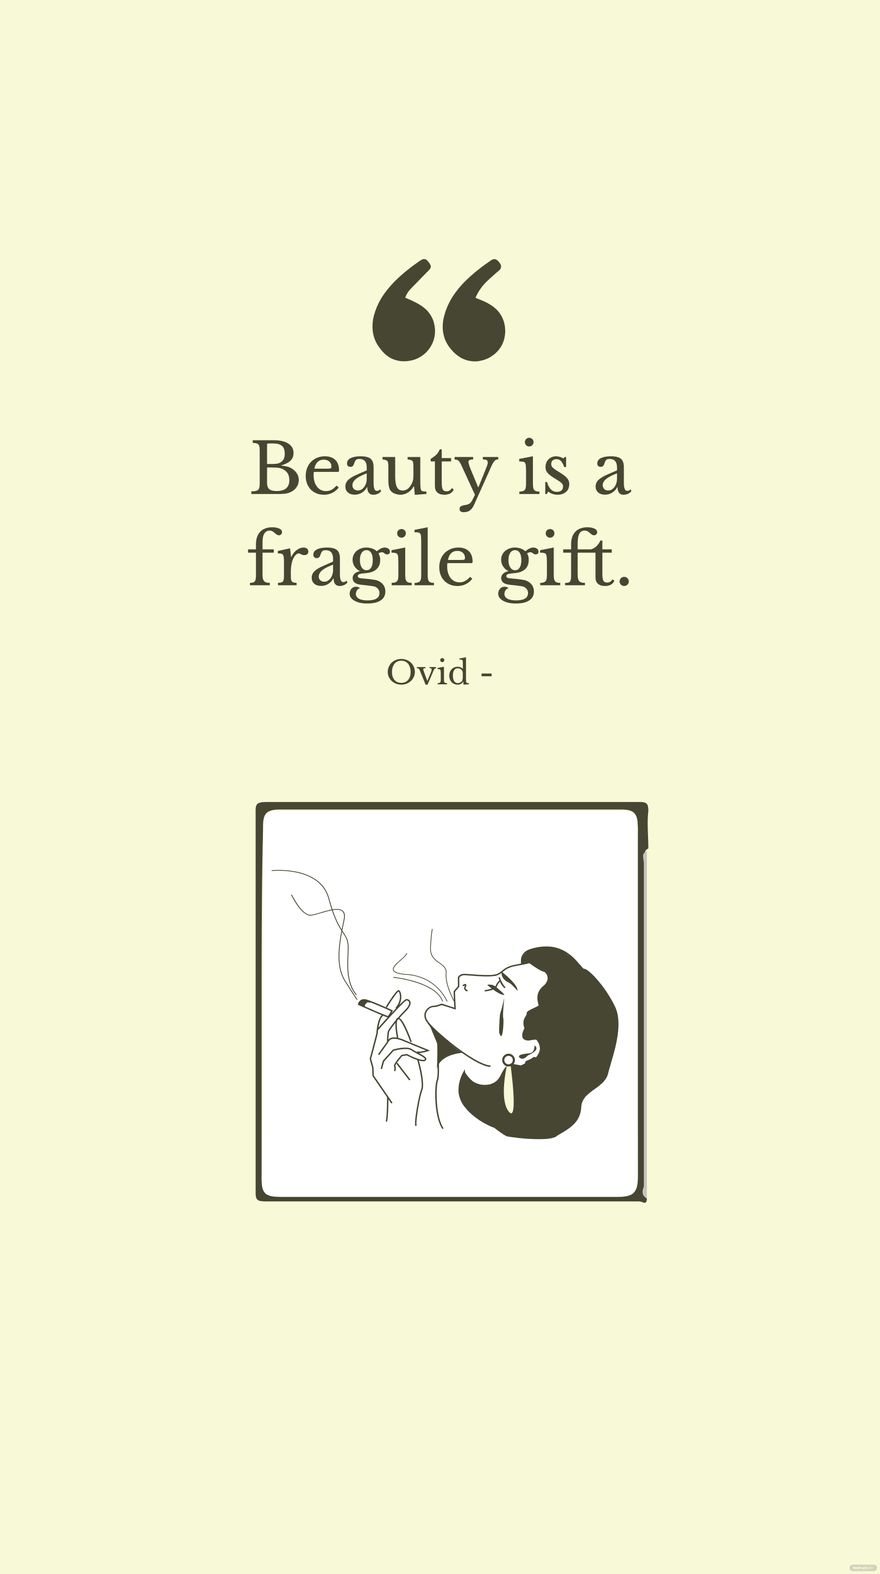 Free Ovid - Beauty is a fragile gift. in JPG